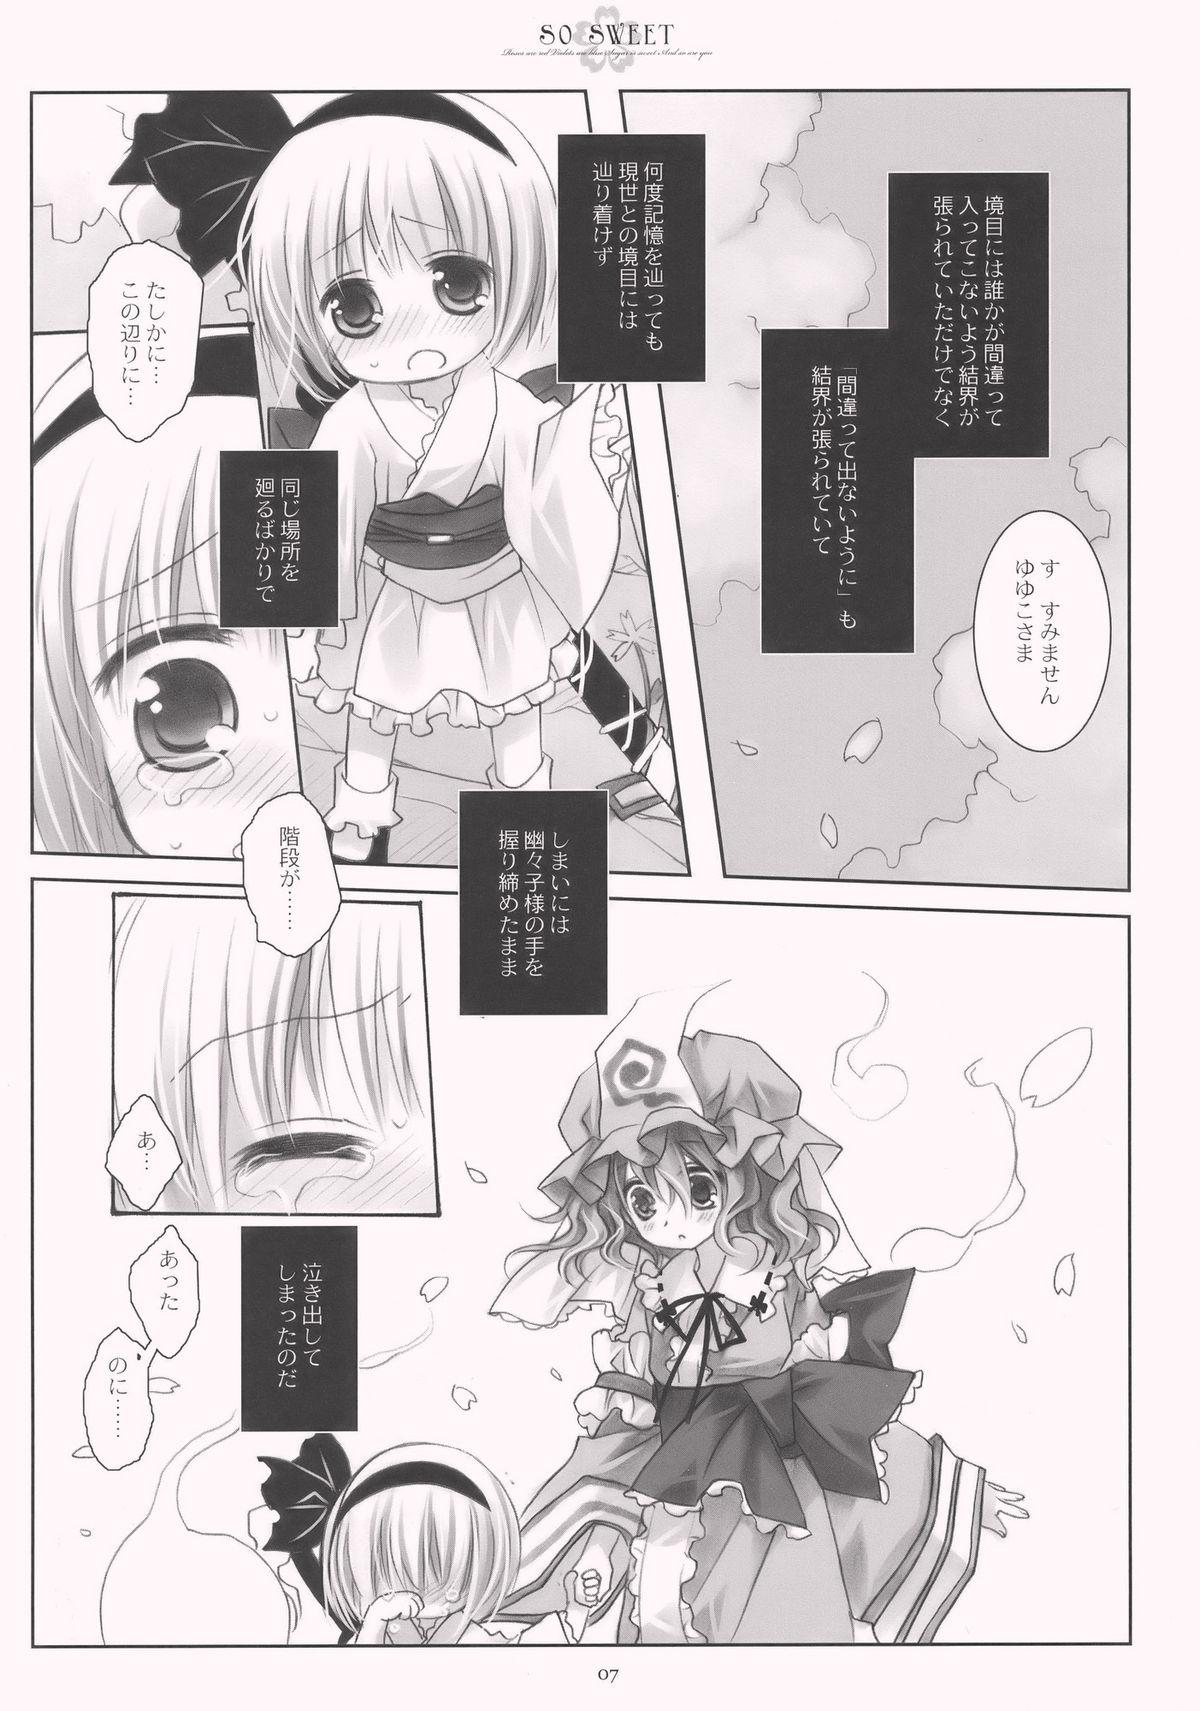 Brazzers SO SWEET - Touhou project Por - Page 7